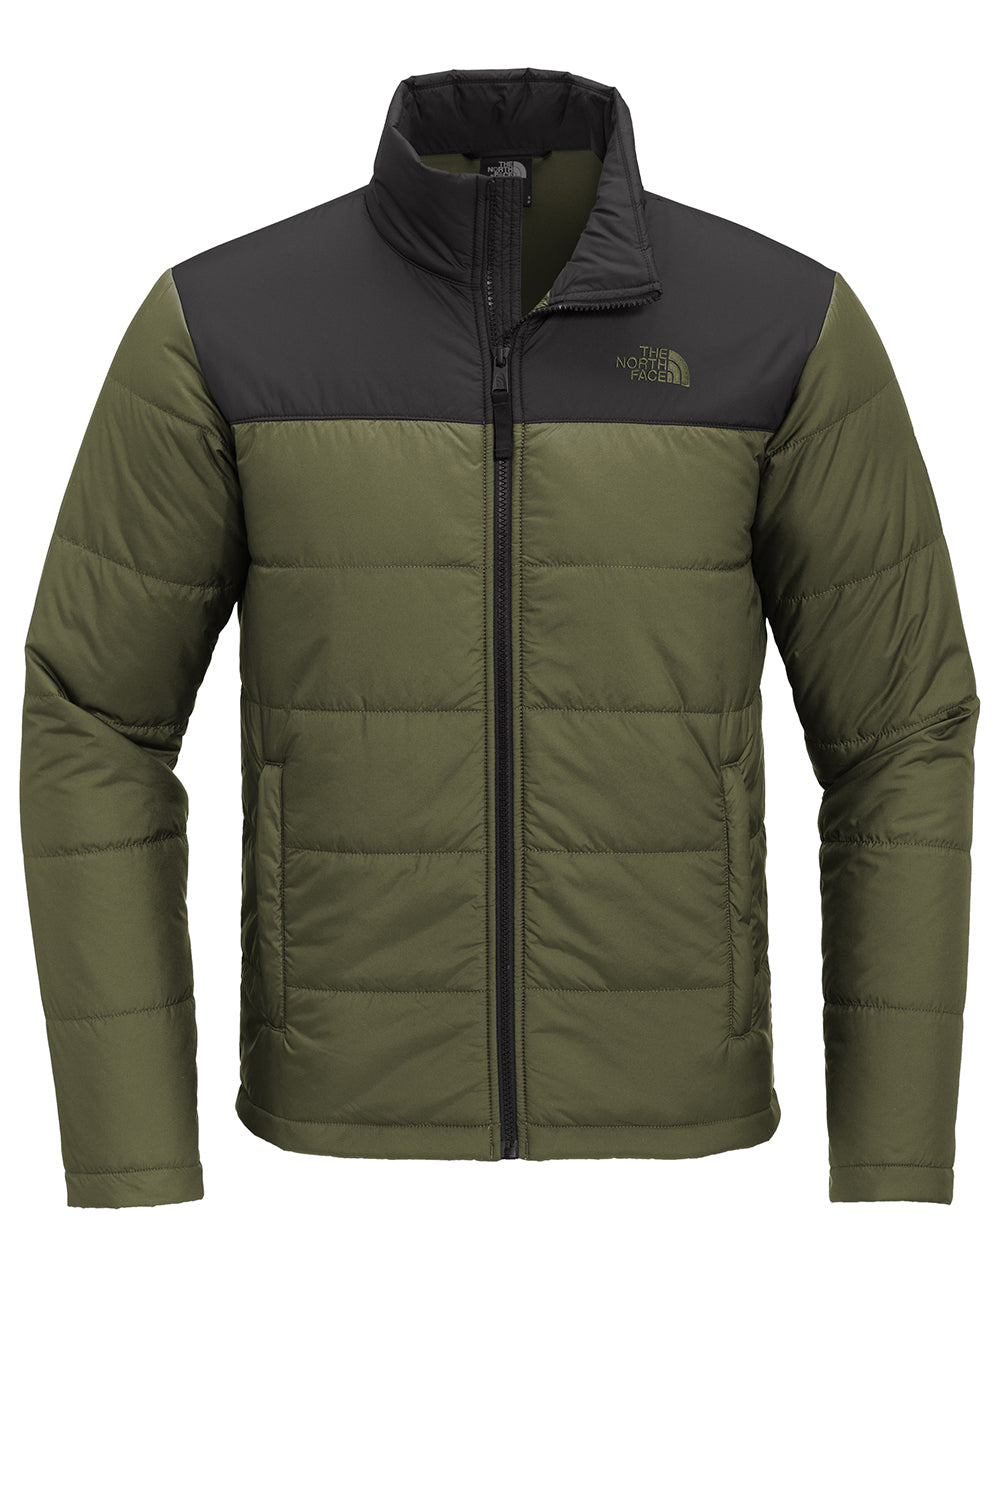 The North Face NF0A7V6J Mens Everyday Insulated Full Zip Jacket Burnt Olive Green Flat Front